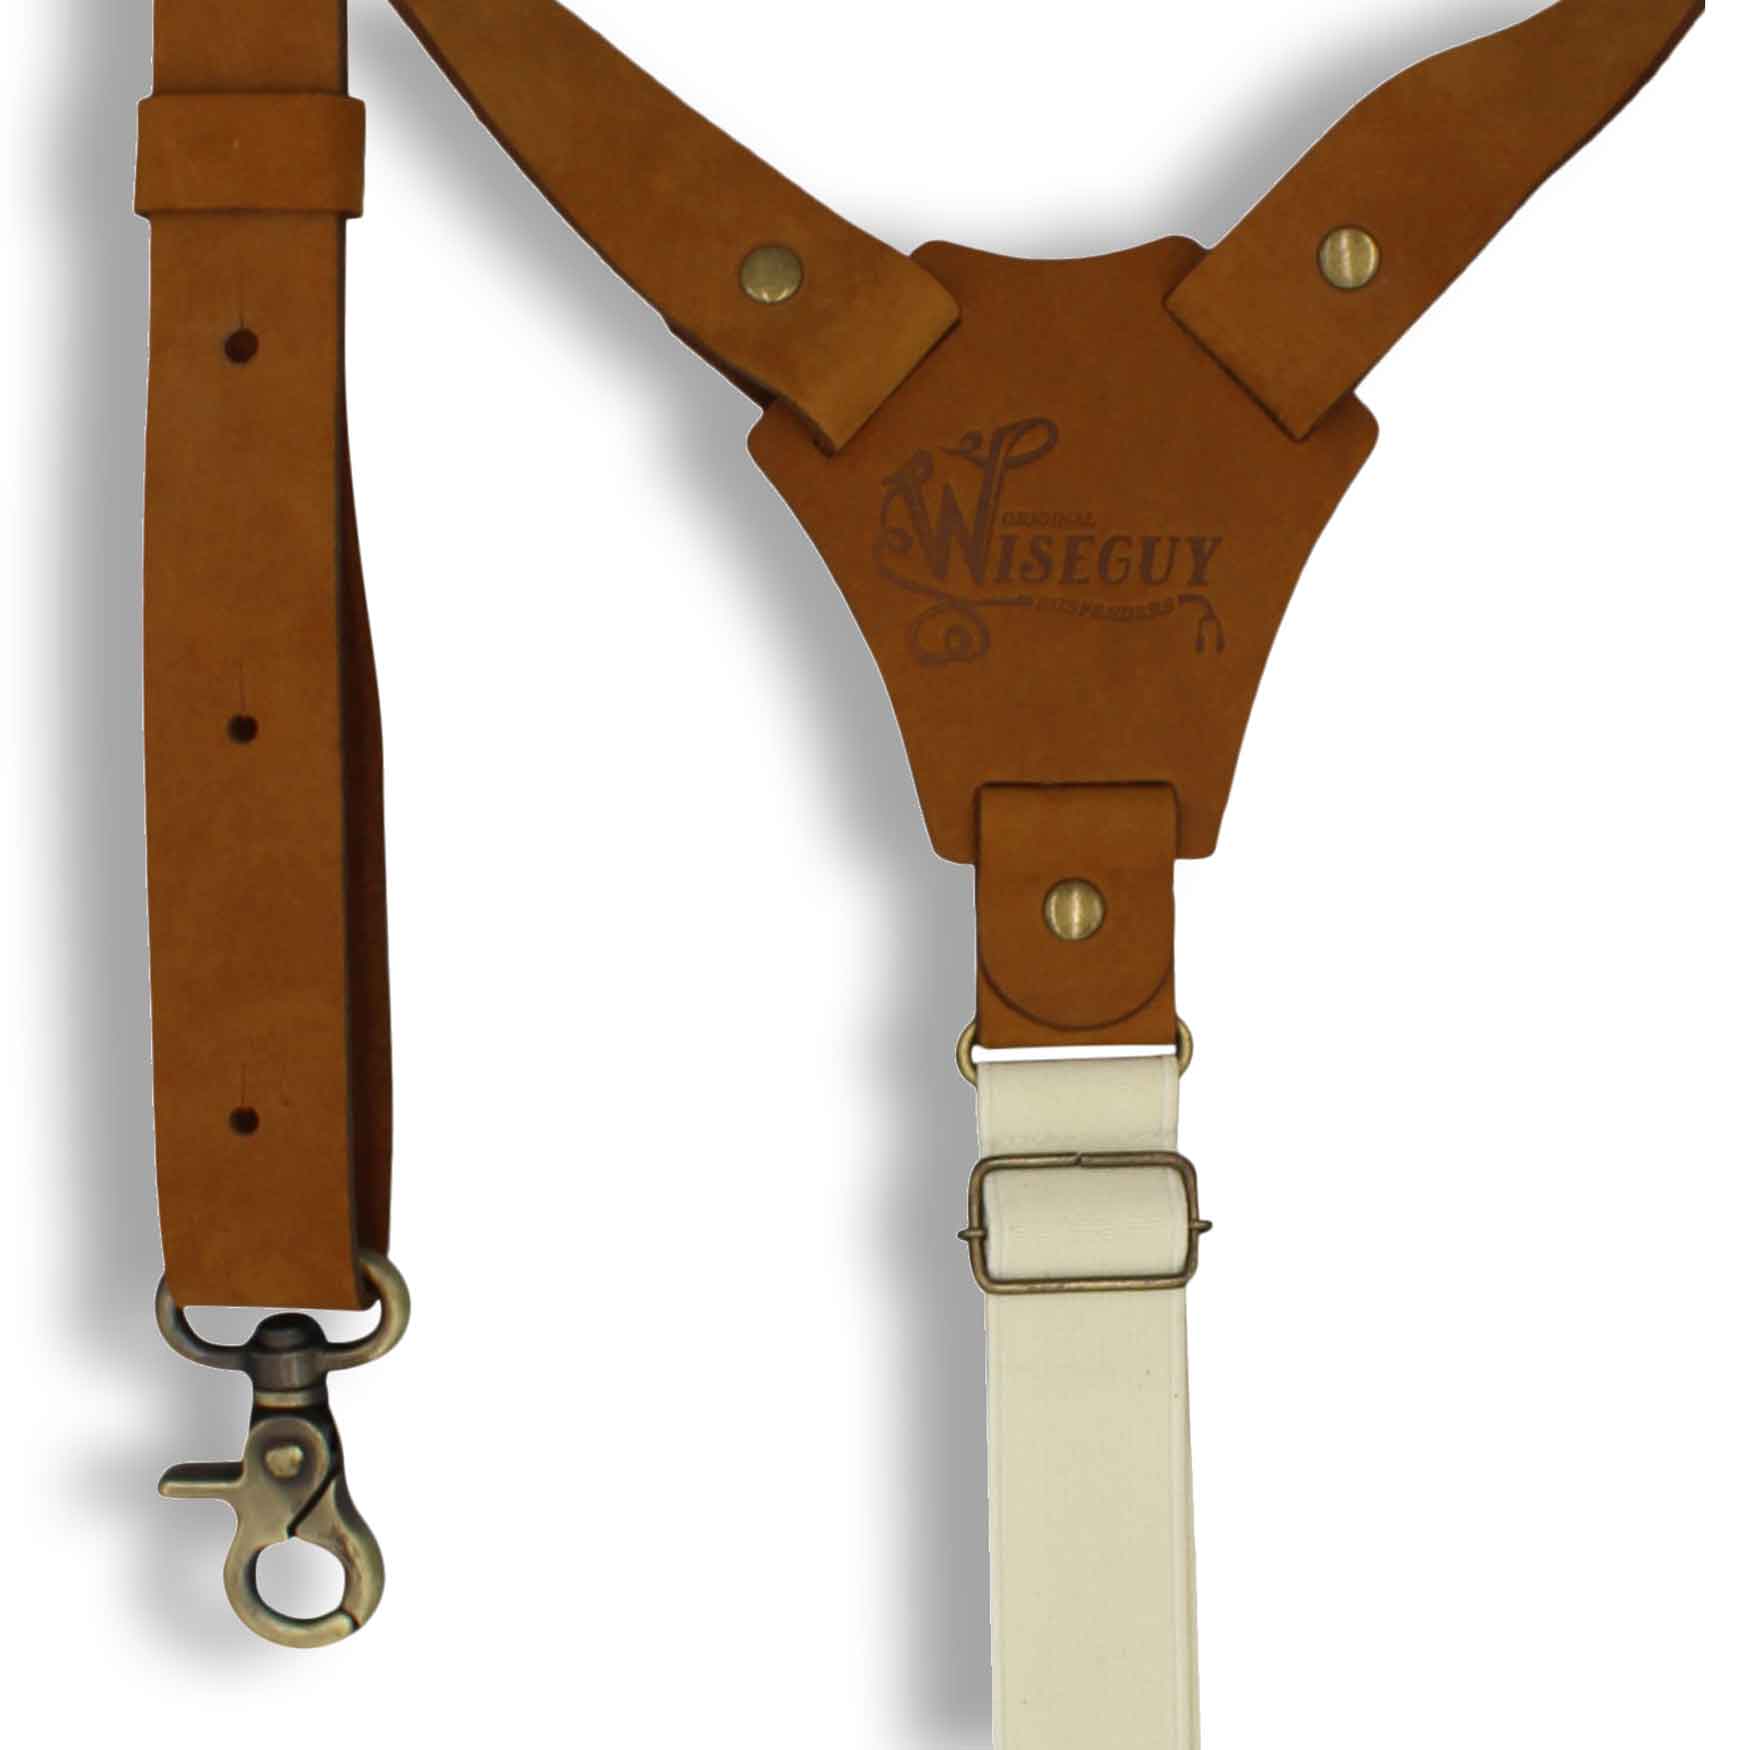 Flex Camel Brown Leather Braces with Elastic off-white Back Straps 1" - Wiseguy Suspenders